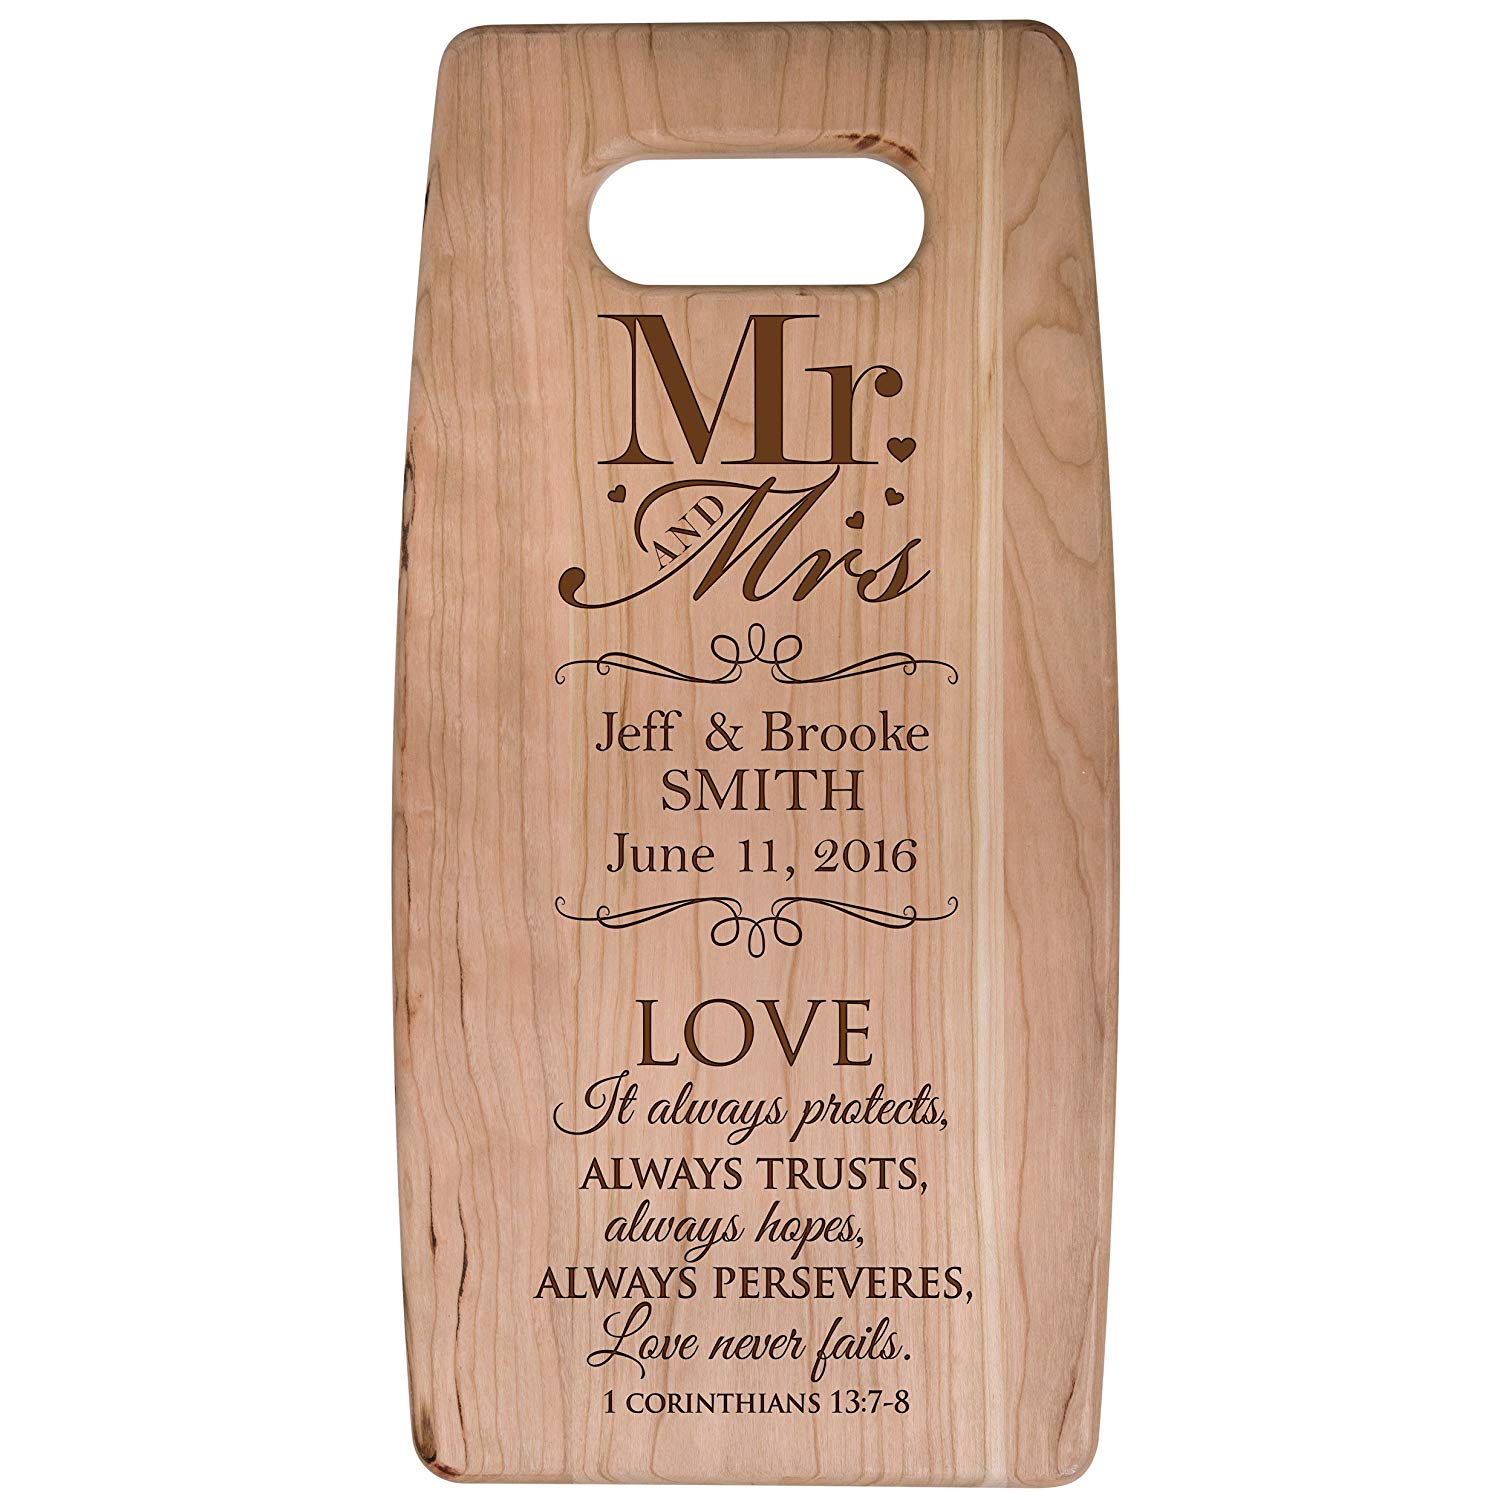 Personalized Engraved Cherry Cutting Board - Love Always Protects - LifeSong Milestones